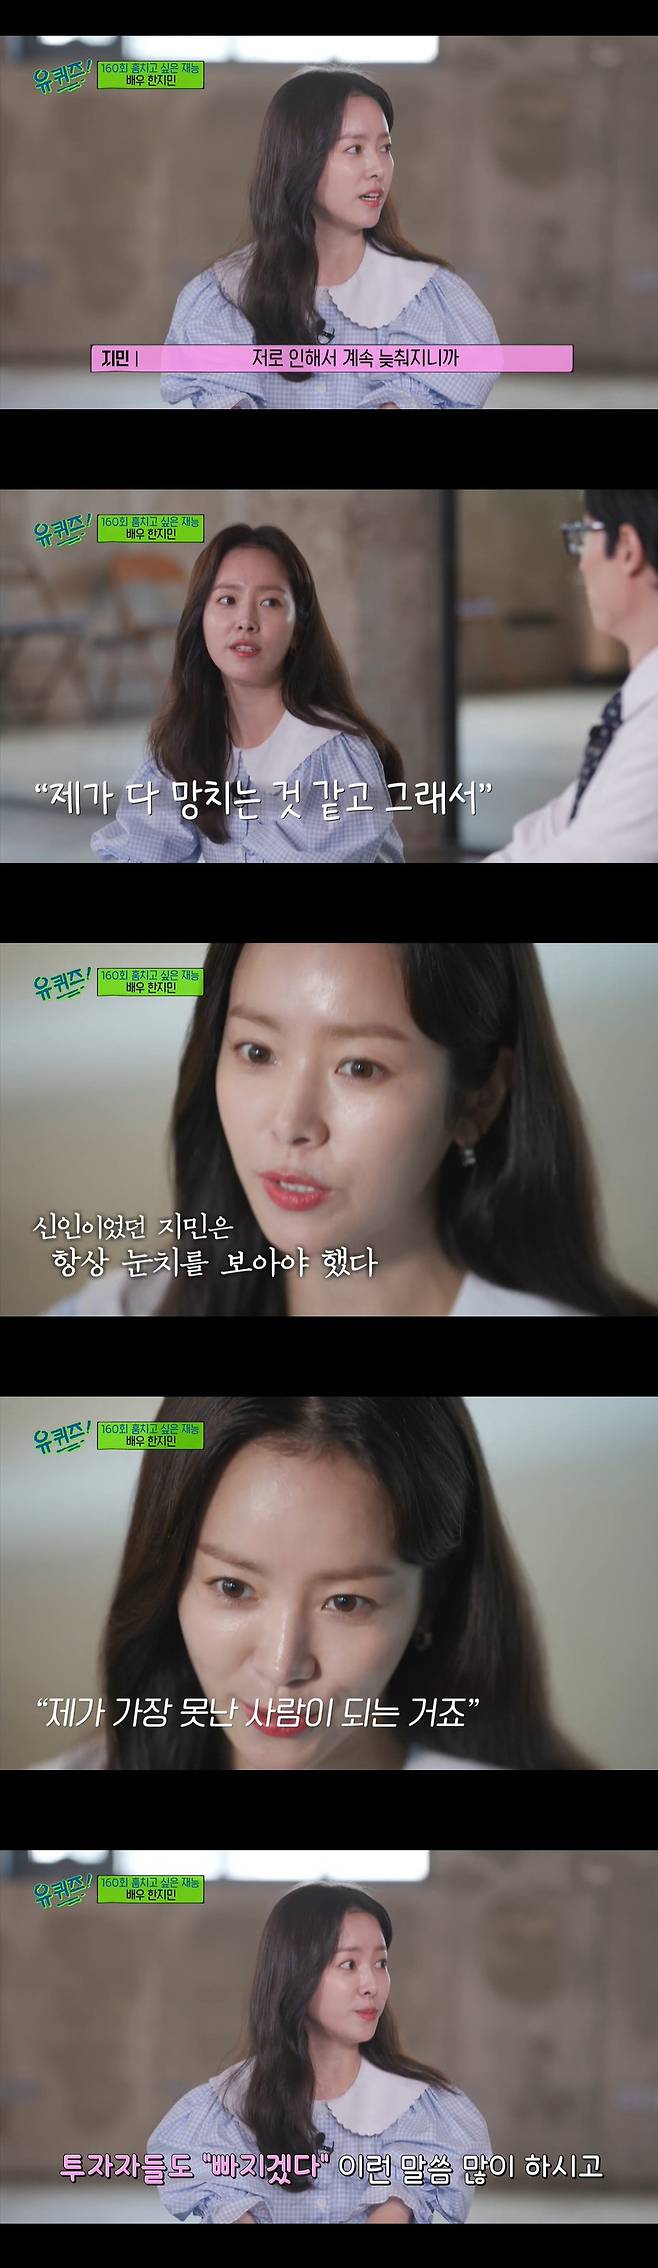 You Quiz on the Block Han Ji-min has told a candid story that he had never done before.Actor Han Ji-min appeared as a guest in the TVN entertainment program You Quiz on the Block on the Block broadcasted on the 6th.It was too bad, said Han Ji-min, who made his debut with All-In in 2003.I have never learned to act, but I think I made my debut with luck.  I could not go on because I was too bad at the scene.I cried every day, he recalled.Han Ji-min said, I was so tired and hated going to the scene. It was too burdensome to keep looking at me.I hate myself and I hate myself. However, Han Ji-min continued to act and regained his confidence.Through Dae Jang Geum, he learned to act on the presidential candidates and gained popularity through discrete.Miss Back is also one of the works that can not be missed in Han Ji-mins filmography.At that time, it was difficult to find a distributor because it was difficult to find a distributor because of the difficult material of child abuse and the reason for being a female one-top star.Han Ji-min said, I am going to play the role rather than a female one-top movie, so investors will fall out.I know that there will be a difference because I know what the image you are expecting and thinking about, but investors seem to be worried about it.I understand, so I have a feeling that I have to do better. I also practiced tobacco for the role, and spitting and spitting. Han Ji-min said, As soon as I filmed, I knew.First of all, Focus wanted to go to tobacco. He said, I did not have any practice, so if I meet only those who burn tobacco, I would tell them once and I would go to the corner and spit. Han Ji-min said, I thought that if I did not get it right because there were a lot of smokers, I would not be immersed.I can tell you now comfortably, but then the focus was set on tobacco too much.  Did you quit now? He asked too much.The latest work, Our Blues, which many people consider to be a life work. Han Ji-min plays twin sisters with actor Jung Eun-hye suffering from Down syndrome.Han Ji-min said, I think I was also prejudiced, he said, referring to his breathing with Jung Eun-hye. I have a friend of Downs syndrome among my relatives.I was worried about how I would adapt to the difficult interactions with people and the sensitive part of my interpersonal relationship.But everyone wrapped up with love and helped me a little in front of me, so I was good like a pro later. Han Ji-min wrote Jung Eun-he a prize money of 1 million won for the right thing.Thank you for remembering me and I love you, said Jung Eun-hye, who added his own savi to the prize money and greeted Han Ji-min, When you come next time, come to eat meat and drink (one cup).